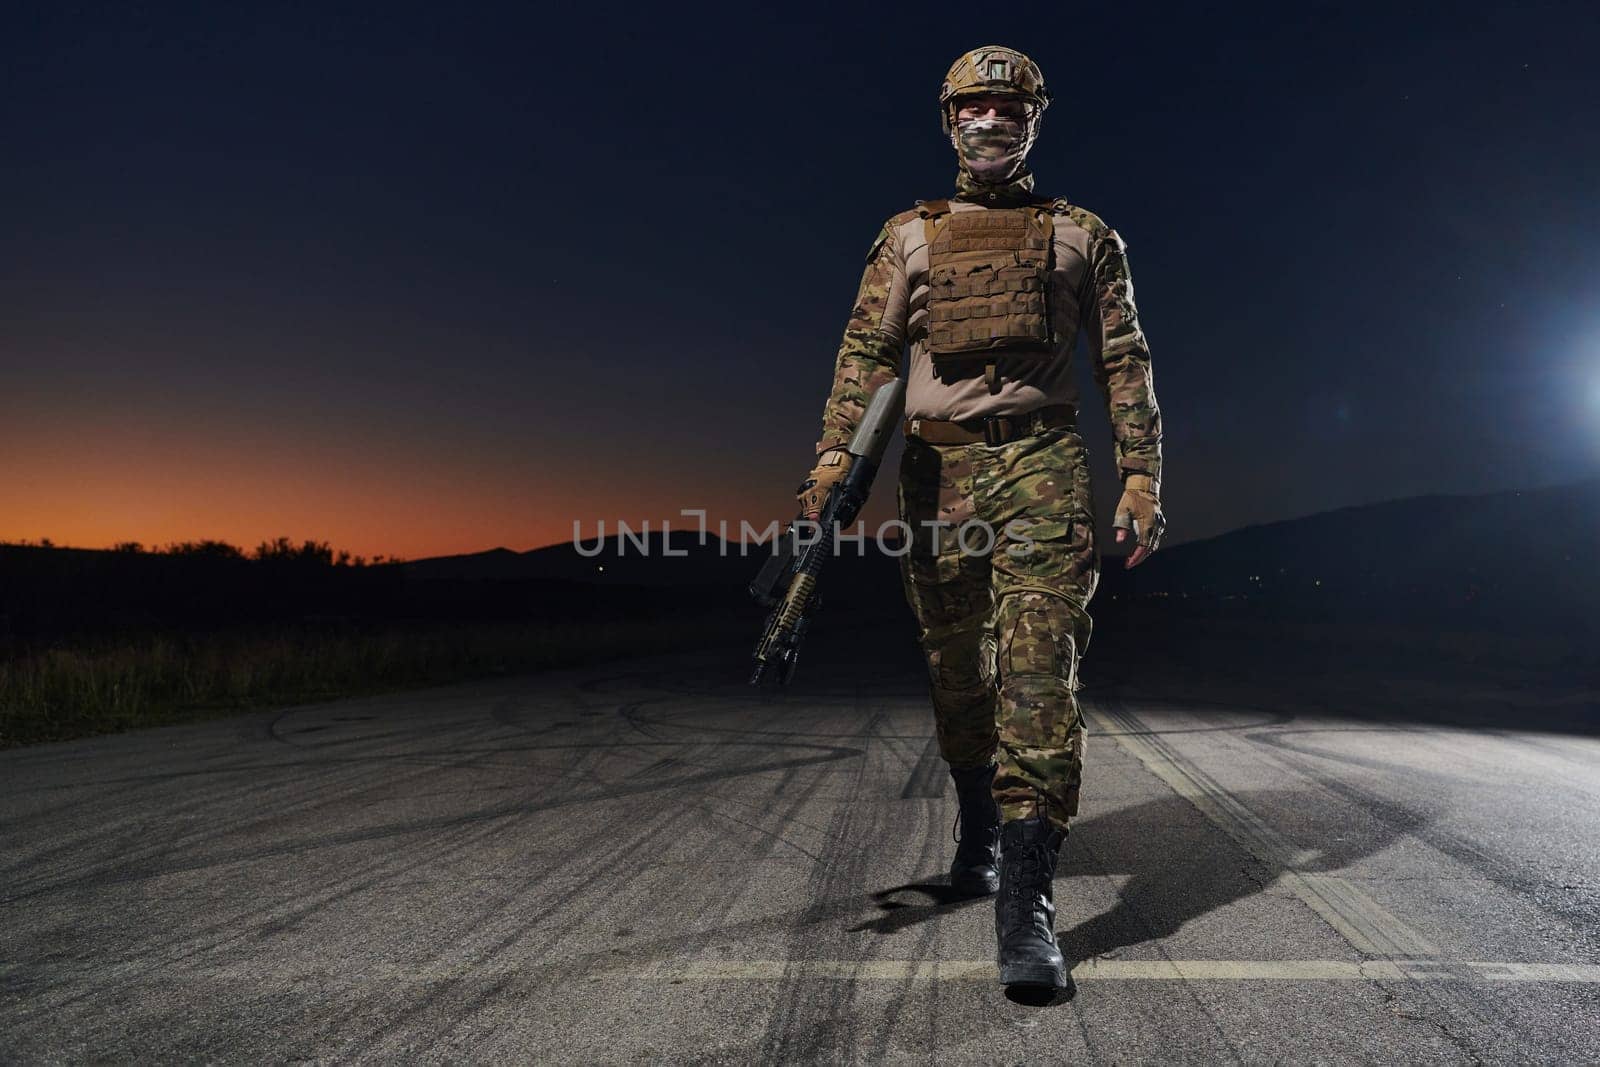 A professional soldier in full military gear striding through the dark night as he embarks on a perilous military mission by dotshock